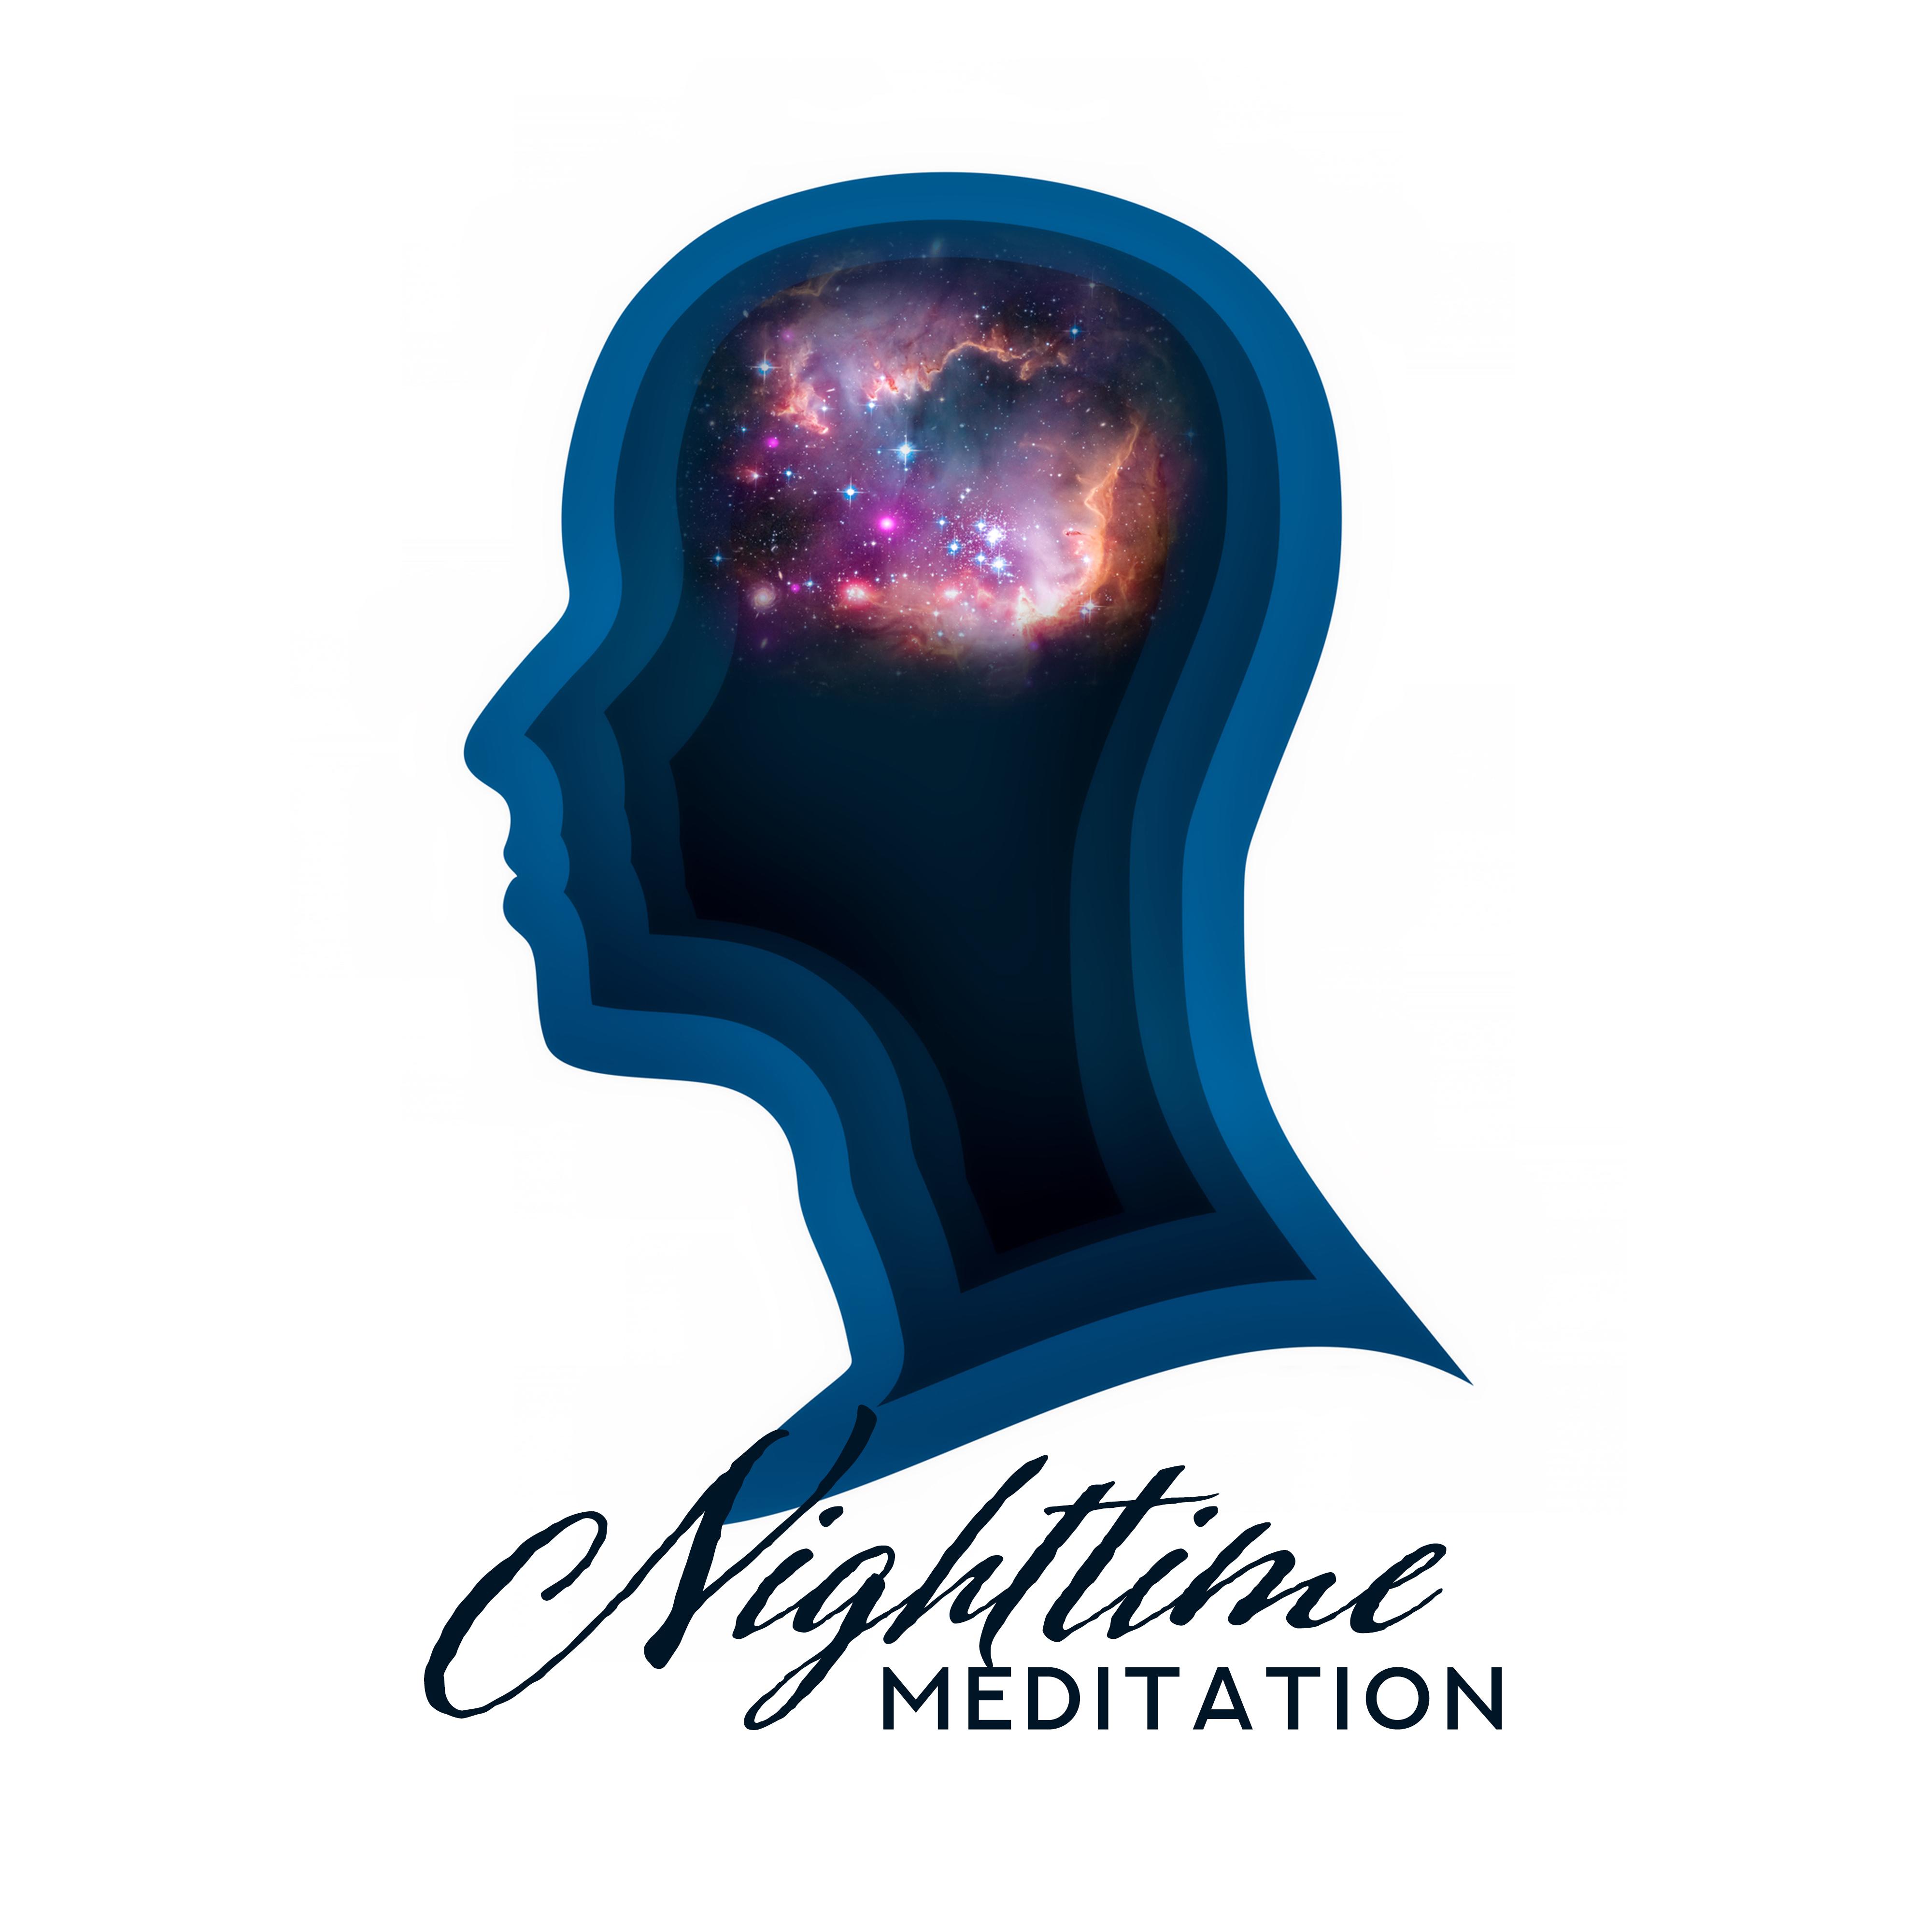 Nighttime Meditation – Ambient Yoga, Inner Balance, Meditation Music to Calm Down, Stress Relief, Yoga Practice